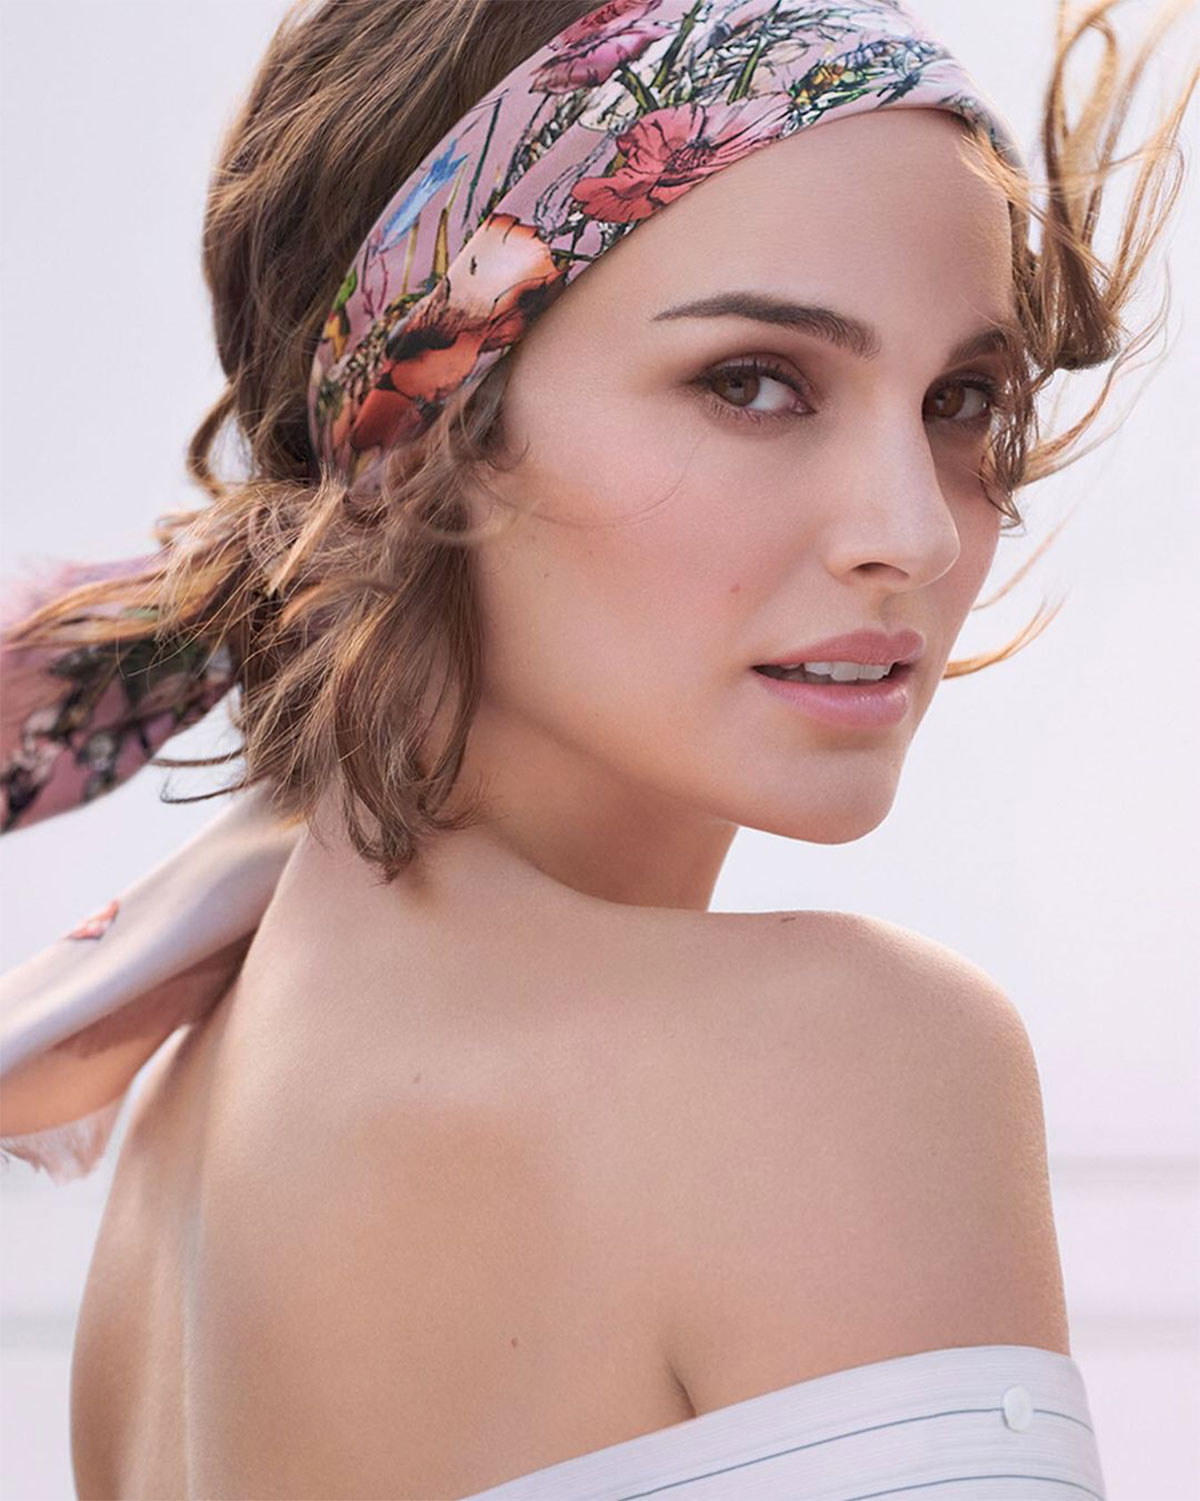 Oscarwinning actress Natalie Portman 36 almost bares all as she strips  off for Miss Dior perfume campaign  The Sun